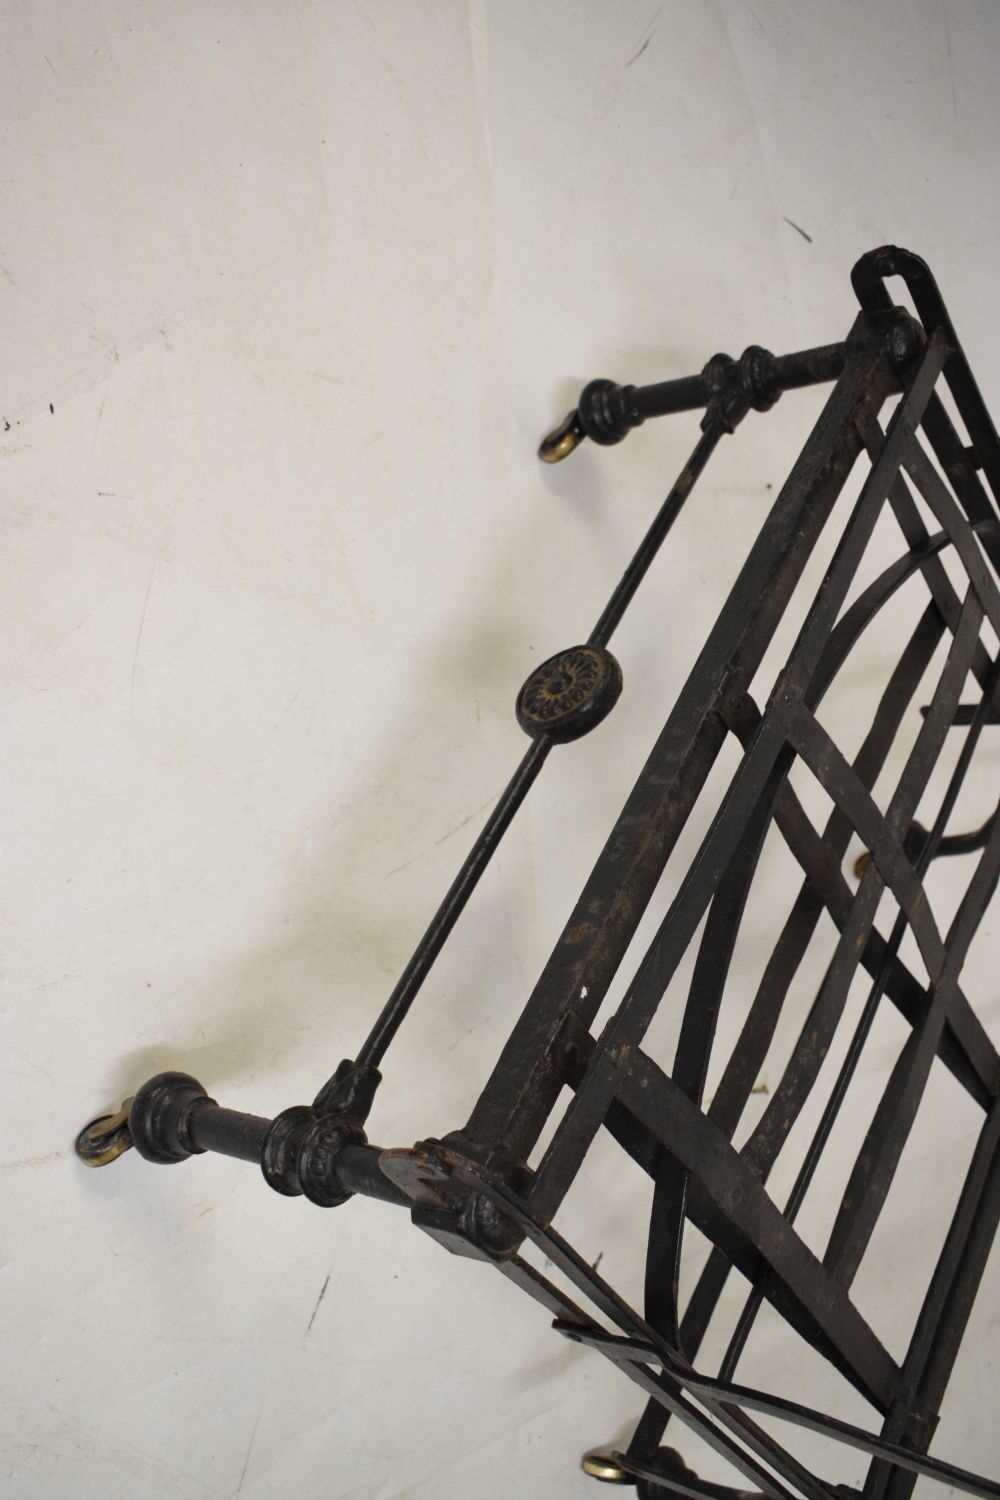 Cast iron campaign bed - Image 3 of 5